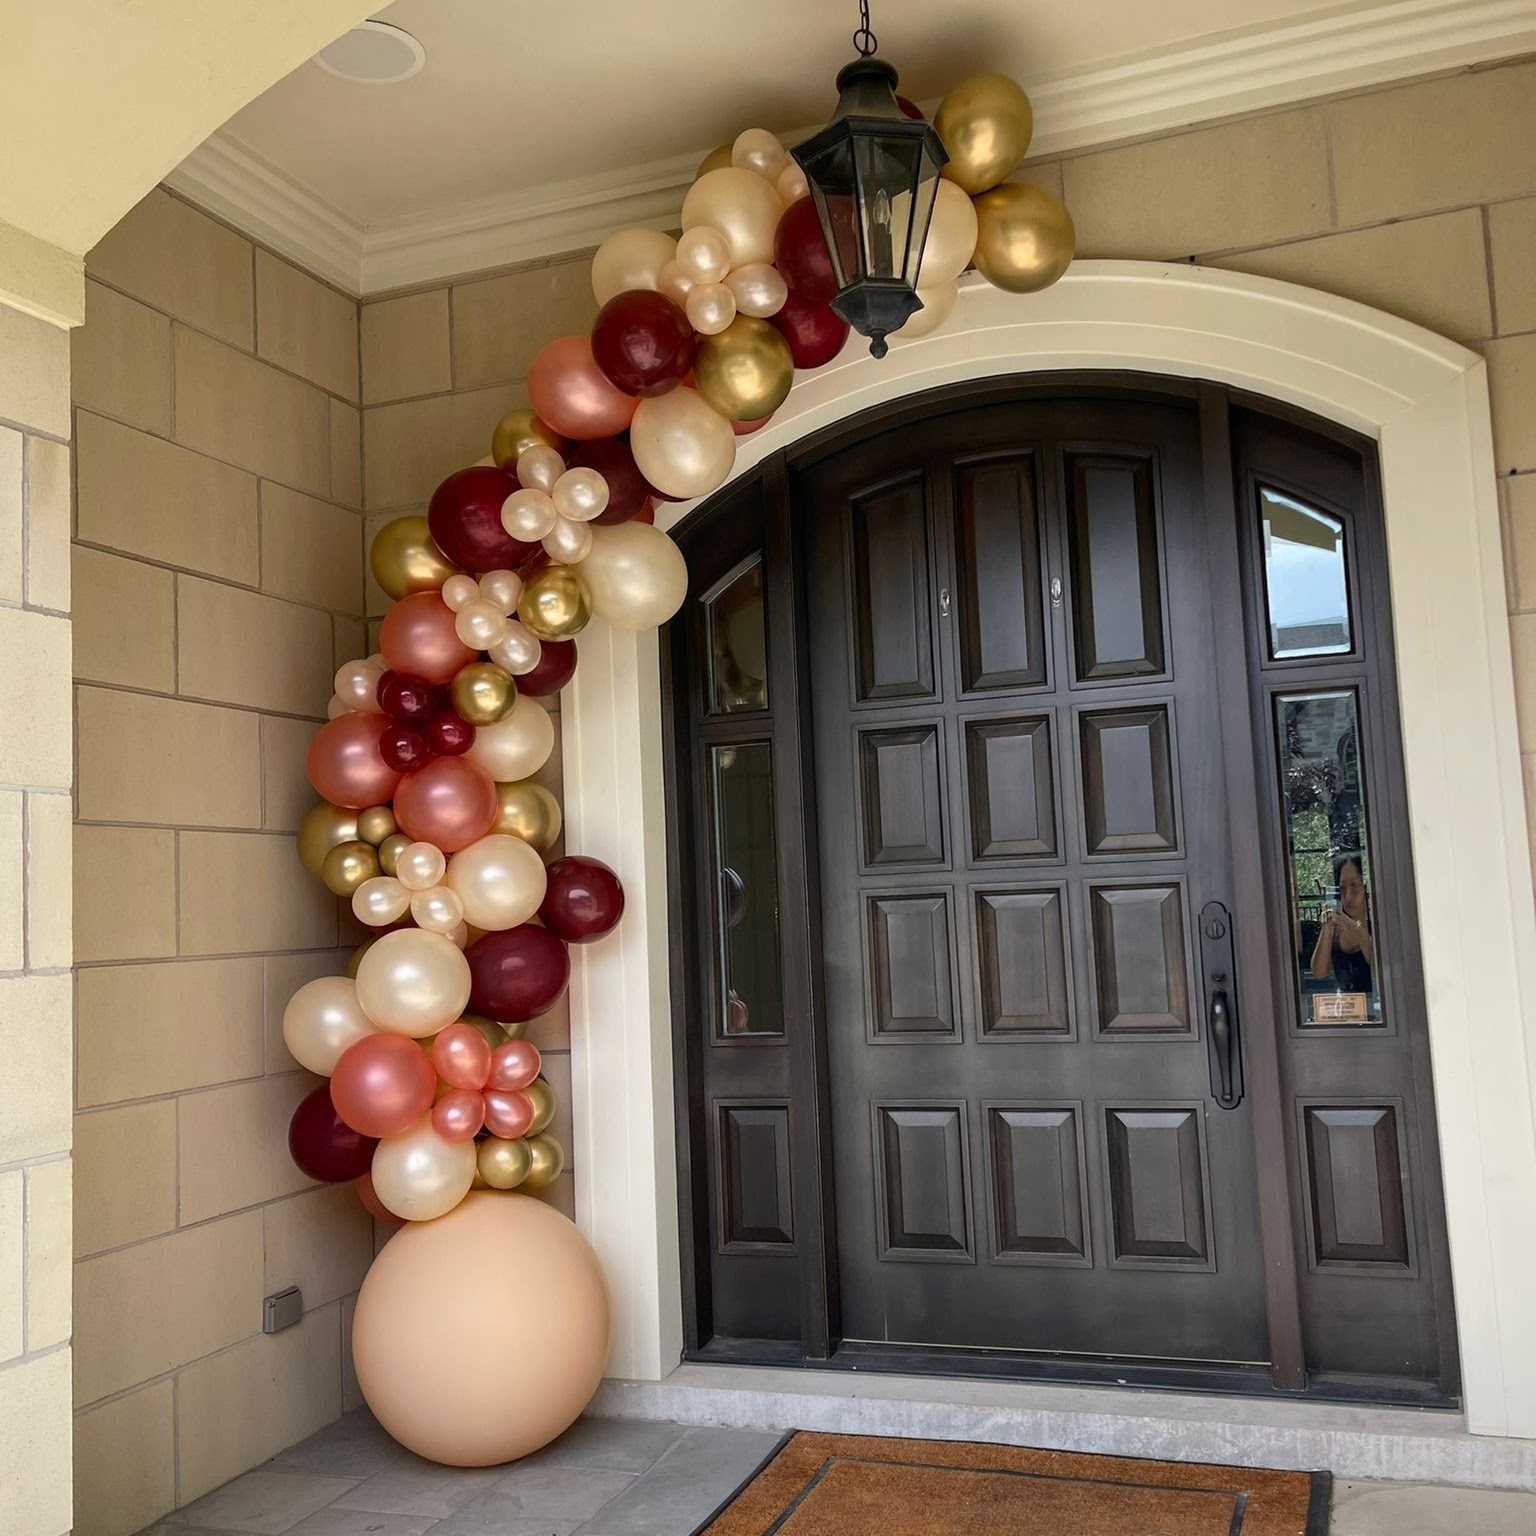 Housewarming Party with Balloon Decor in Mississauga